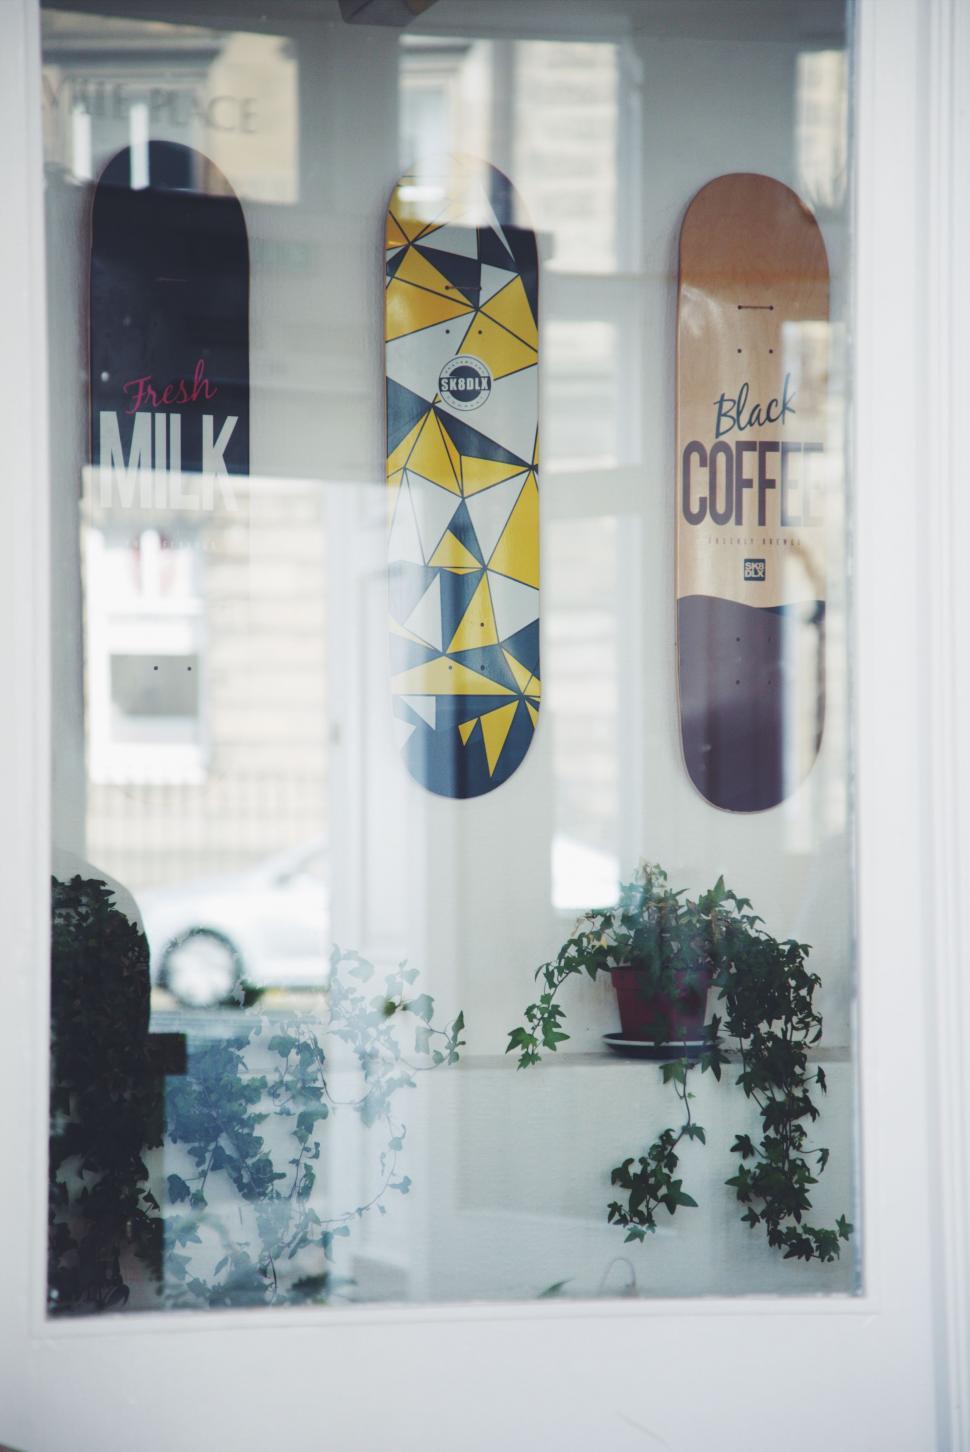 Free Image of Array of Skateboards on Display in a Window 